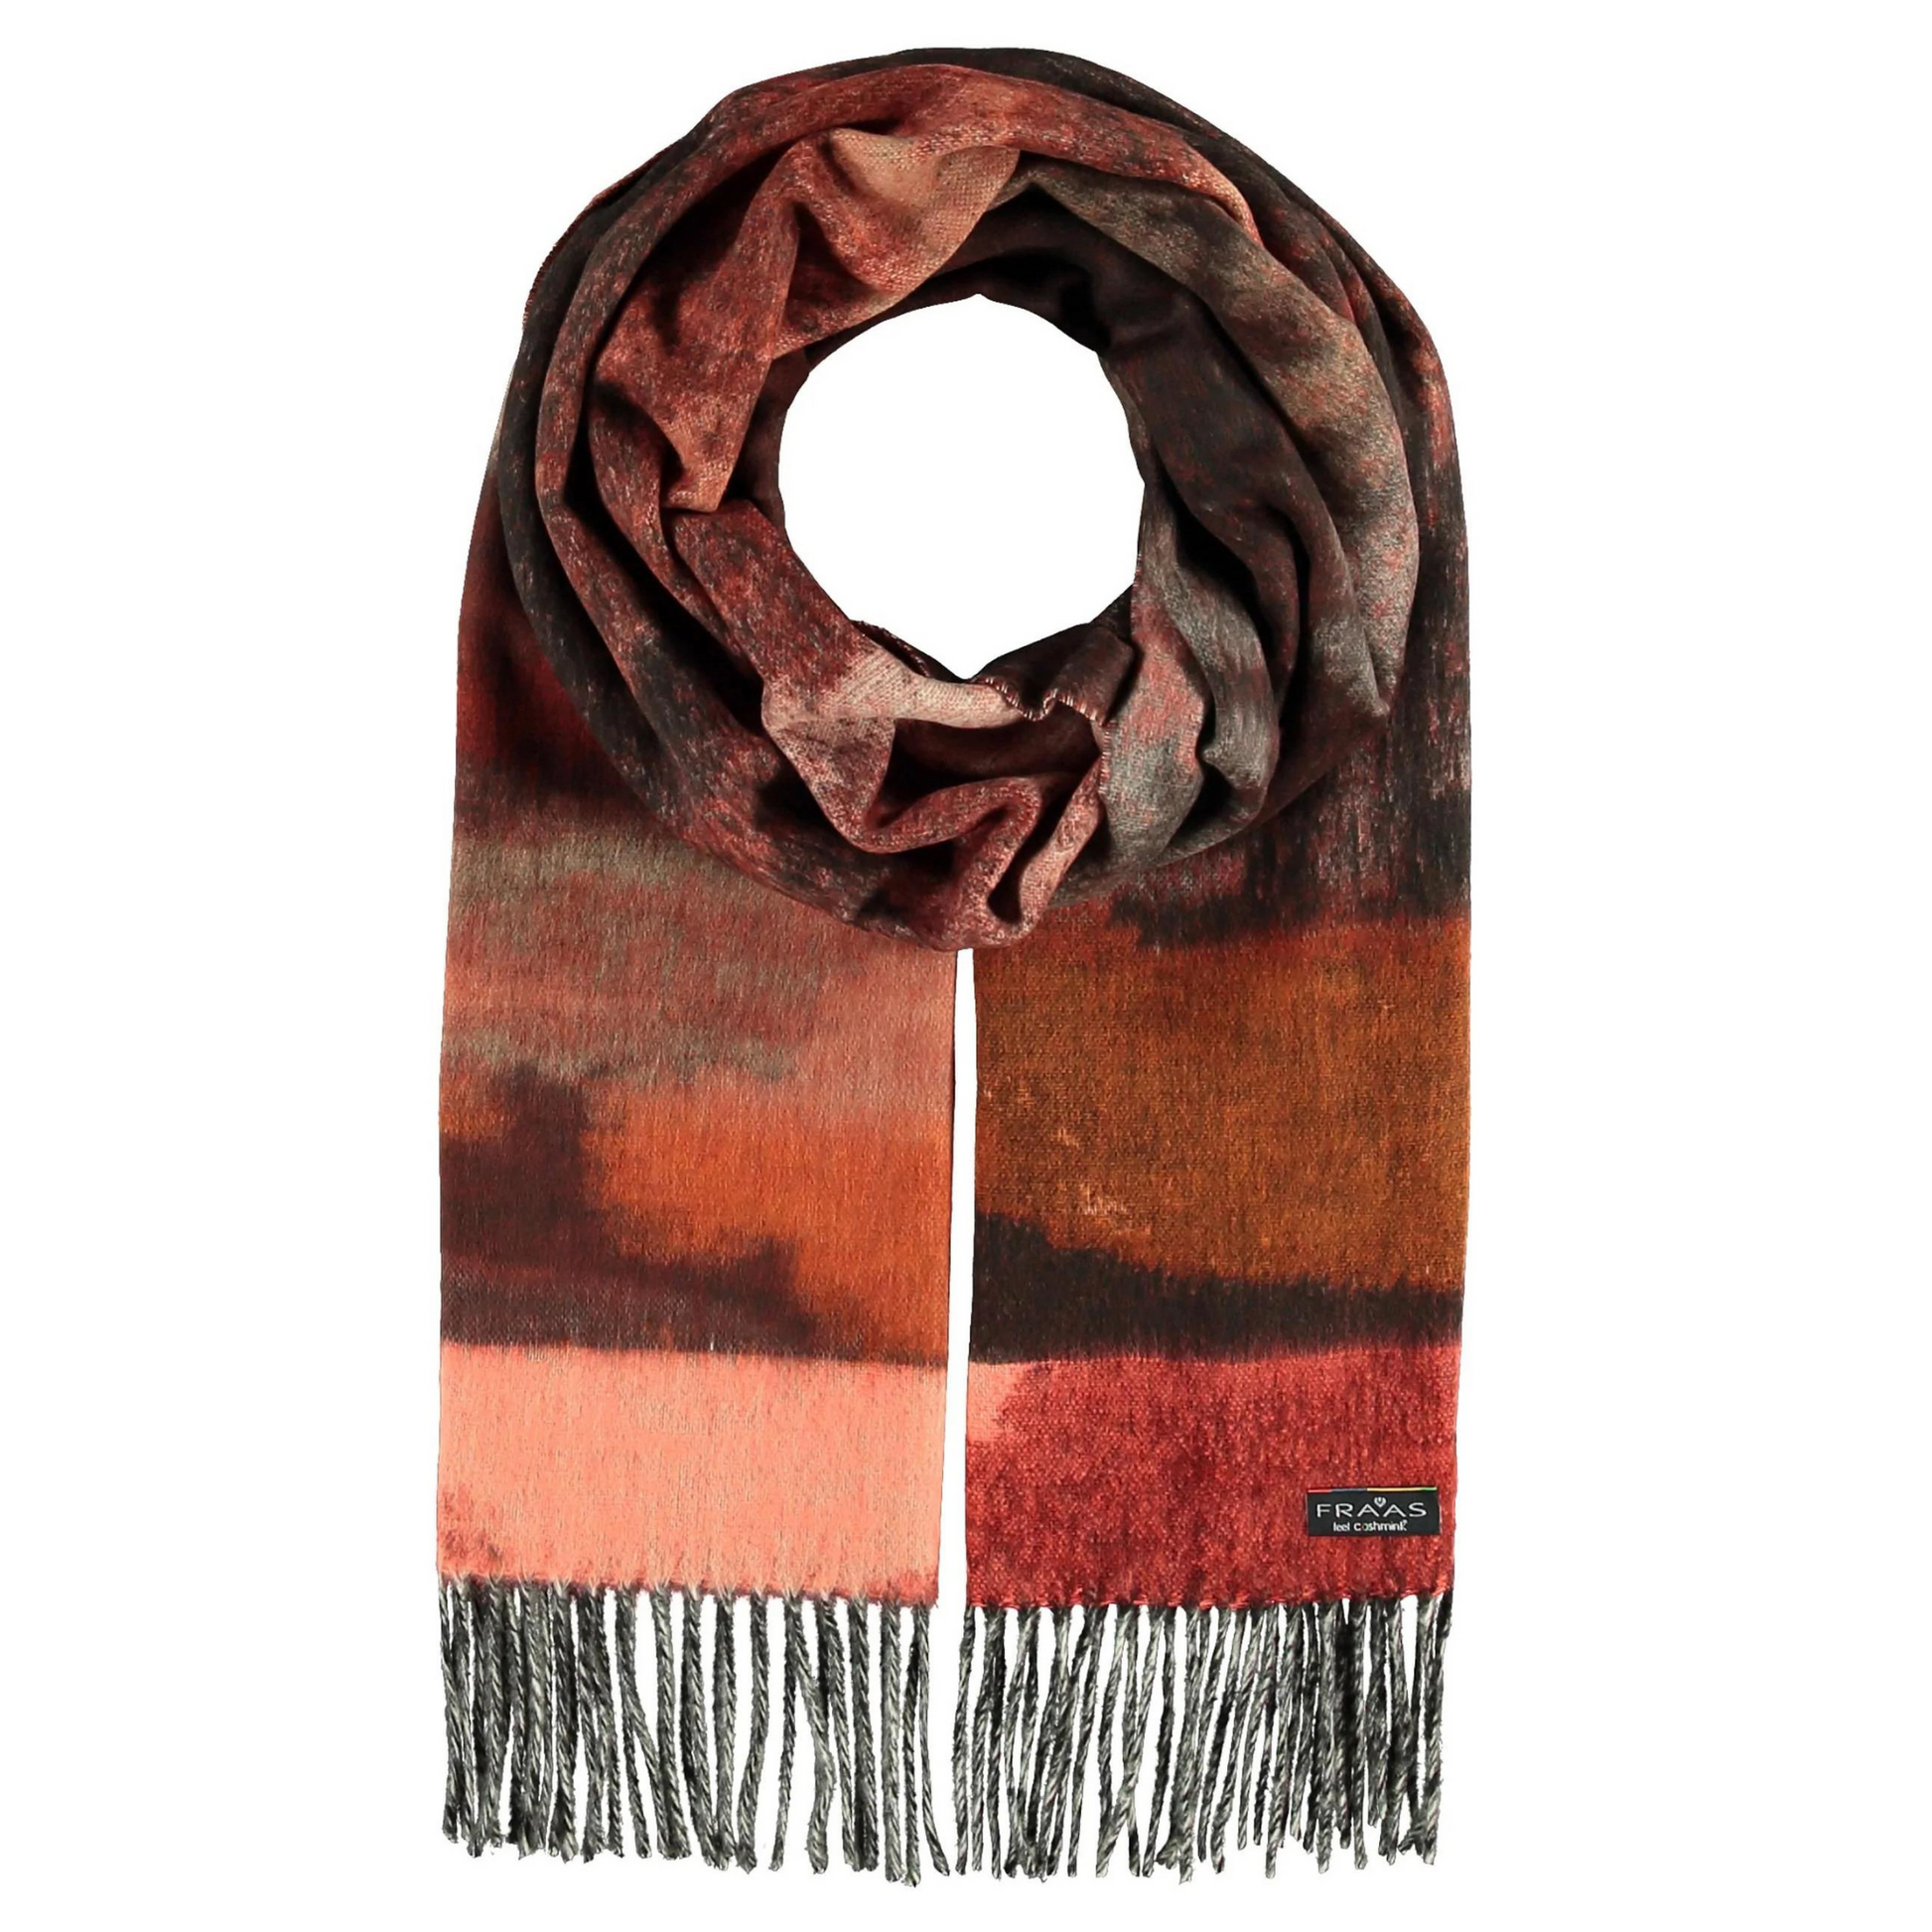 A tonal red and brown scarf is tied, showing a tapestry like print with tassels at the end.